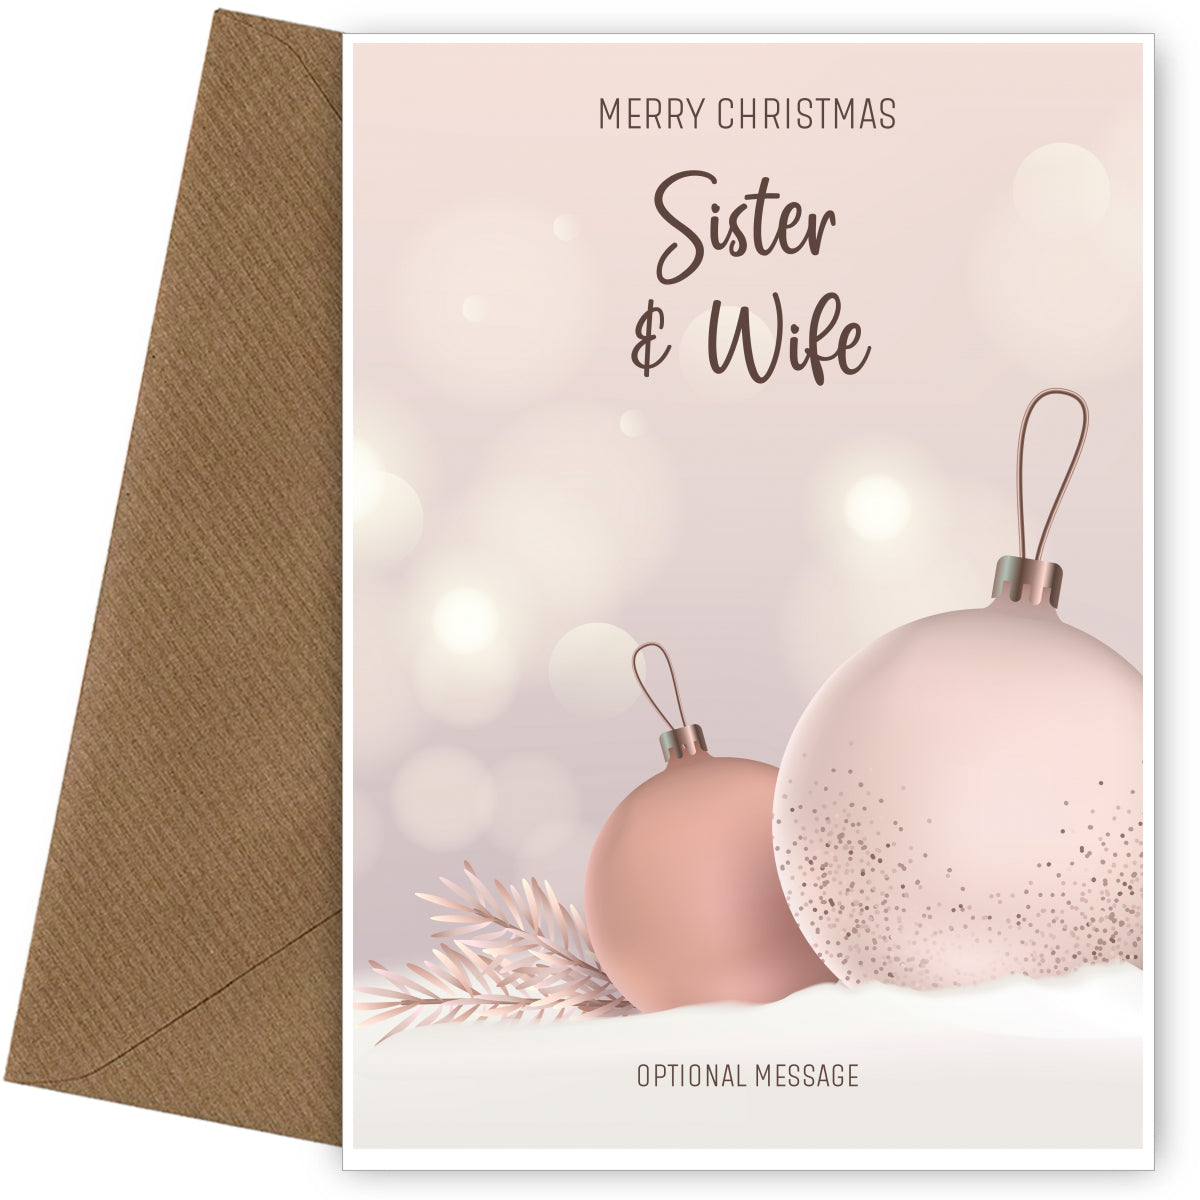 Sister and Wife Christmas Card - Baubles